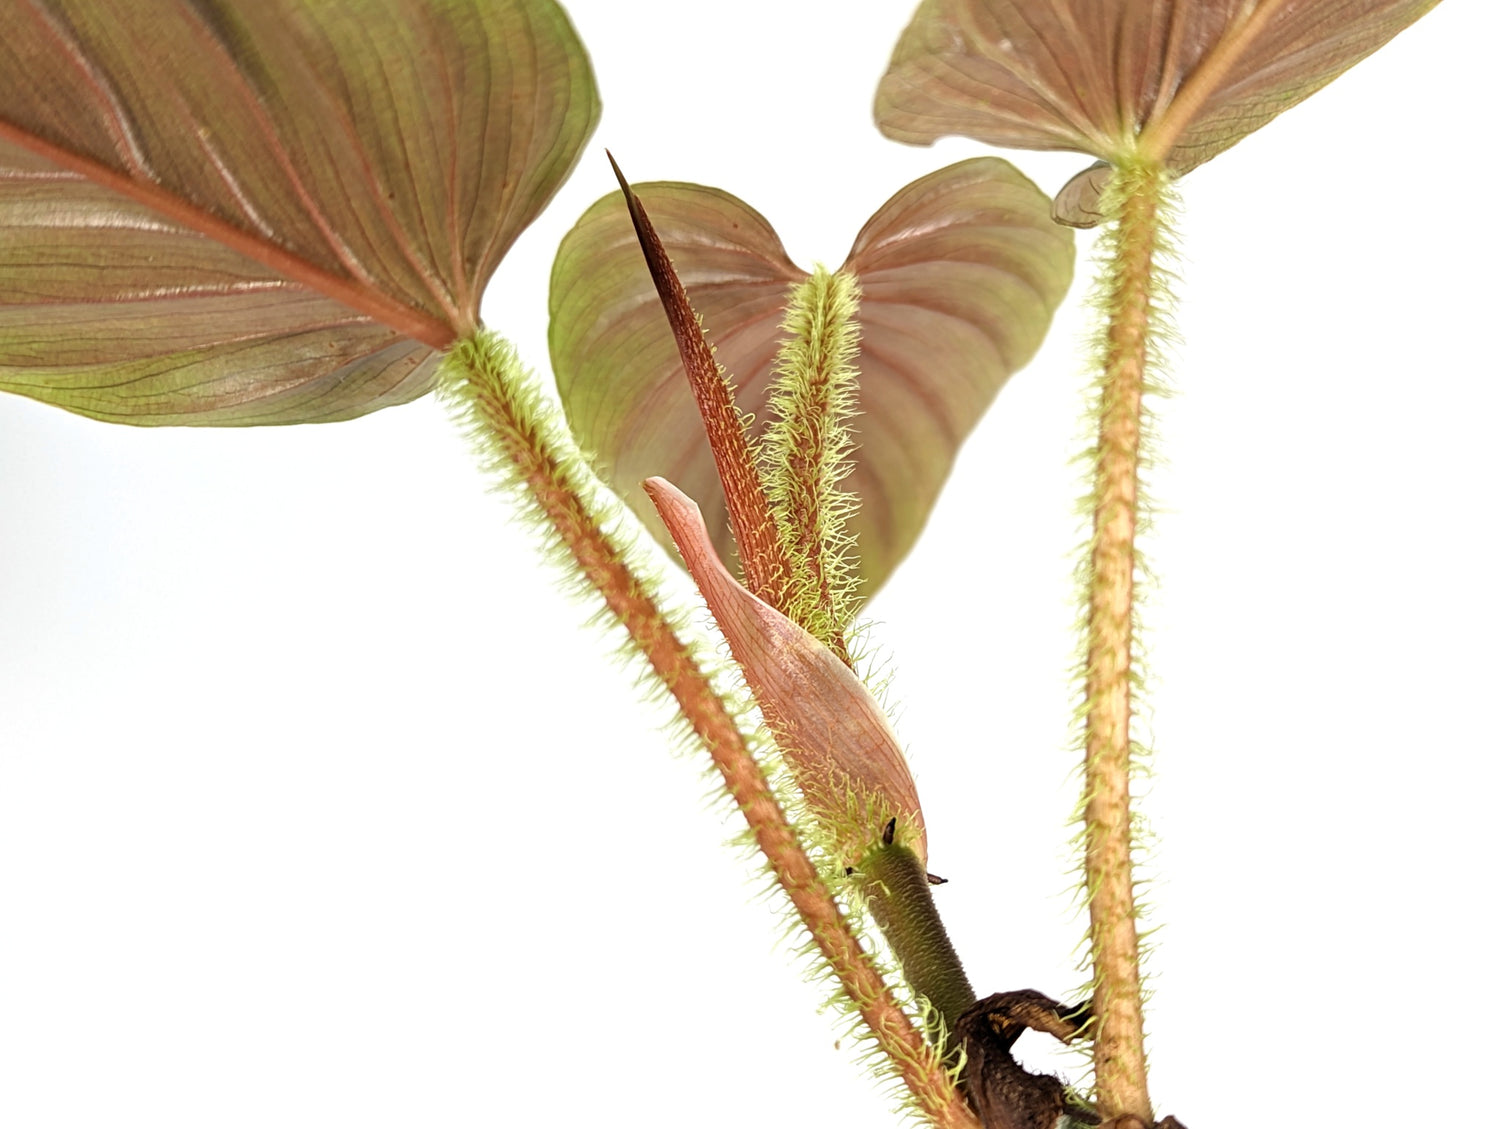 Philodendron serpens